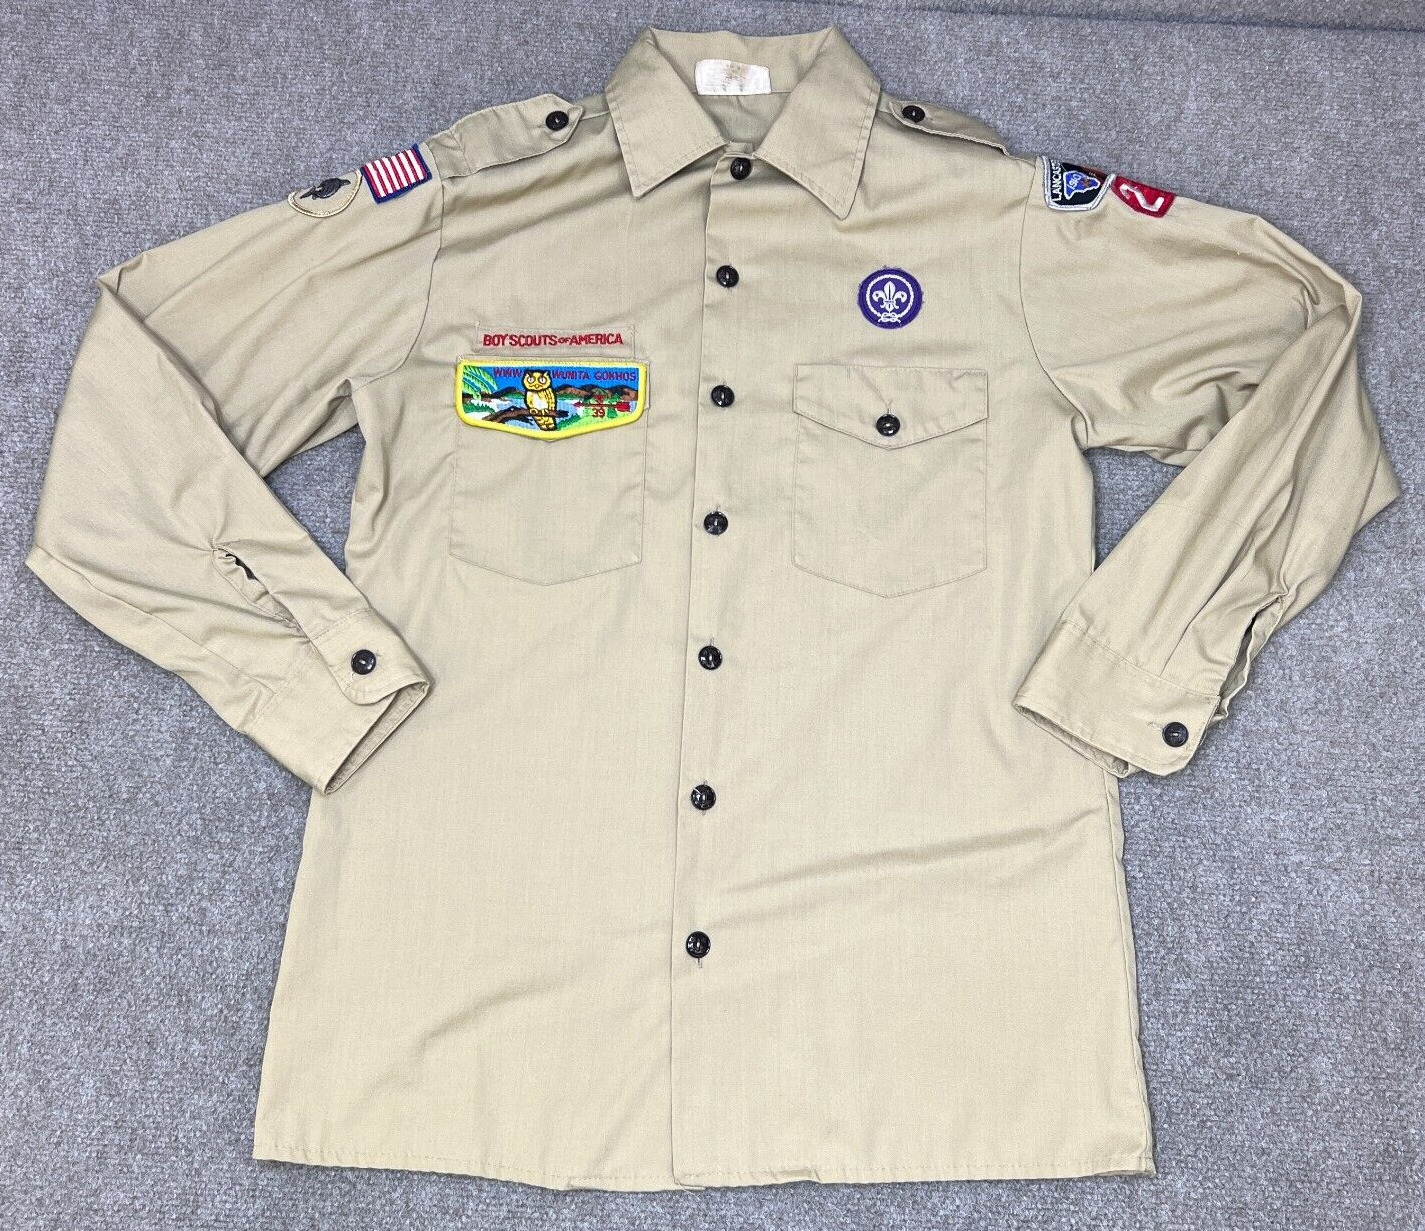 VINTAGE Boy Scouts Shirt Mens Small BSA Uniform Brown Button Up Patches USA Made